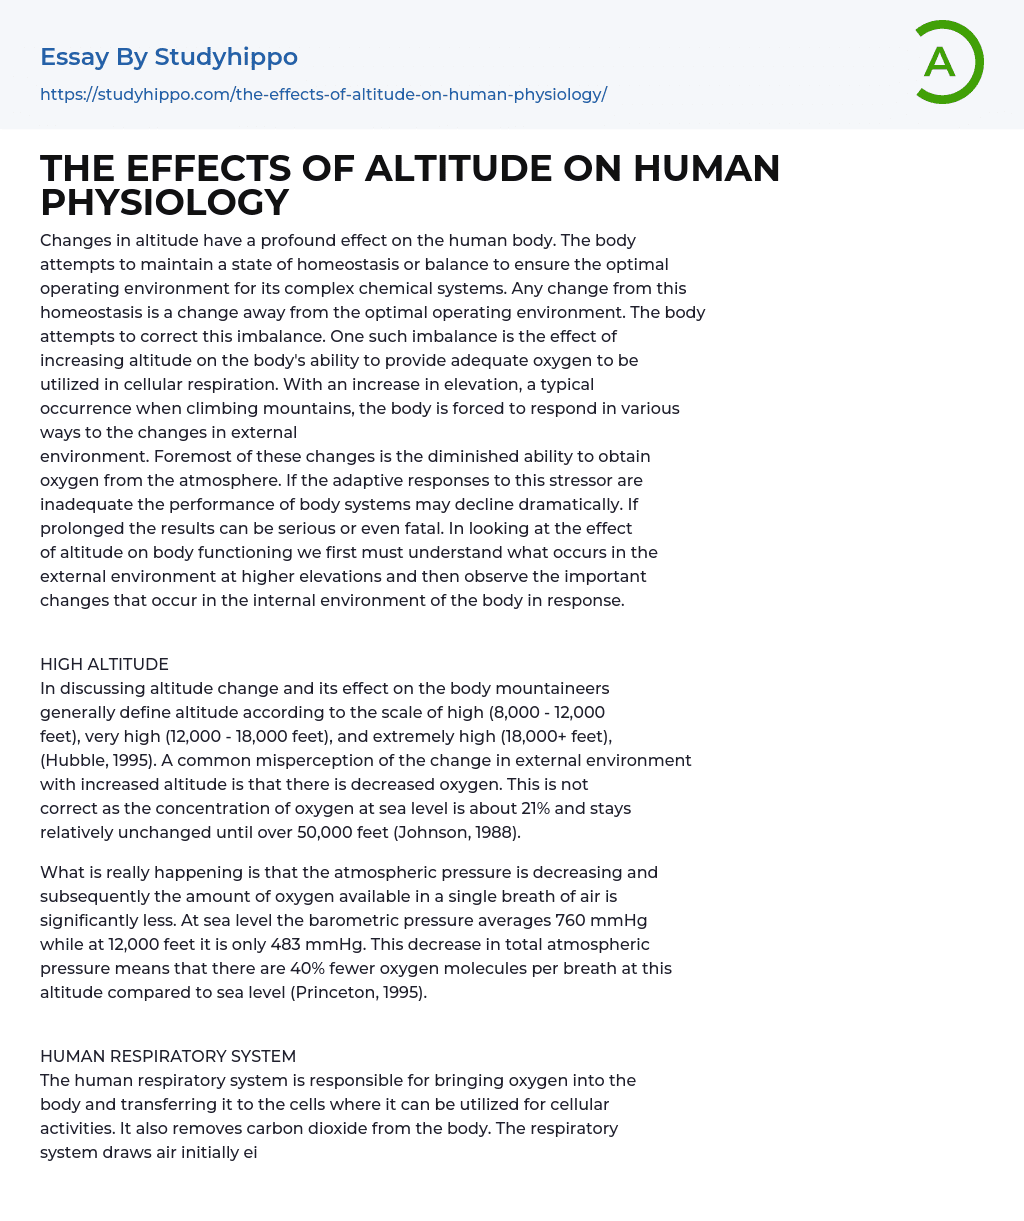 THE EFFECTS OF ALTITUDE ON HUMAN PHYSIOLOGY Essay Example